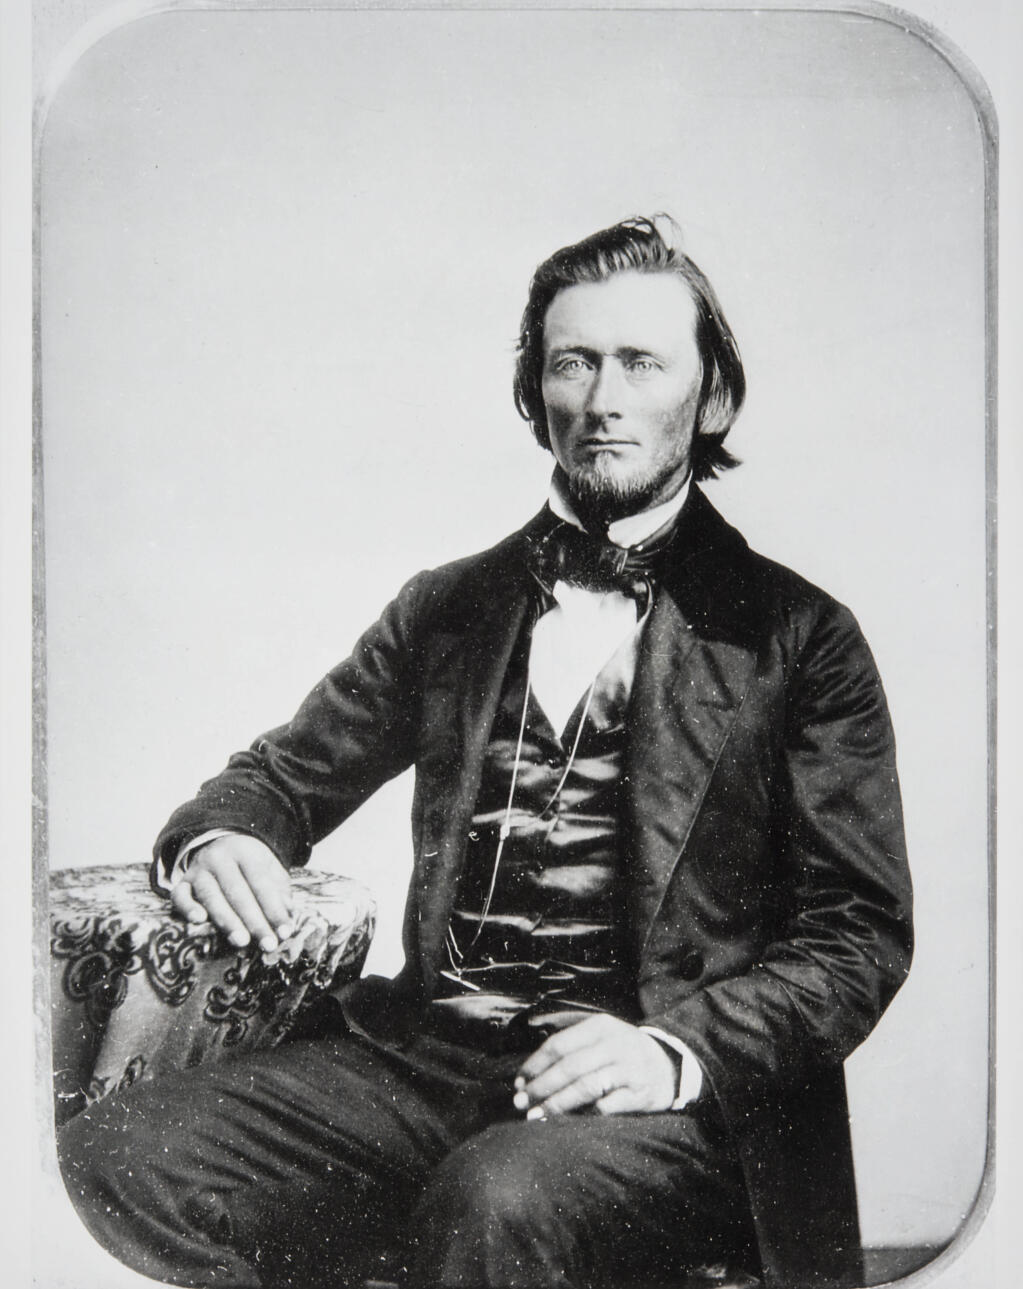 Portrait of Granville P. Swift in Sonoma County in the 1850s. Swift participated in the 1846 Bear Flag Revolt.  He purchased 15,000 acres from Mariano Vallejo near Sears Point in Sonoma County. (Sonoma County Library)